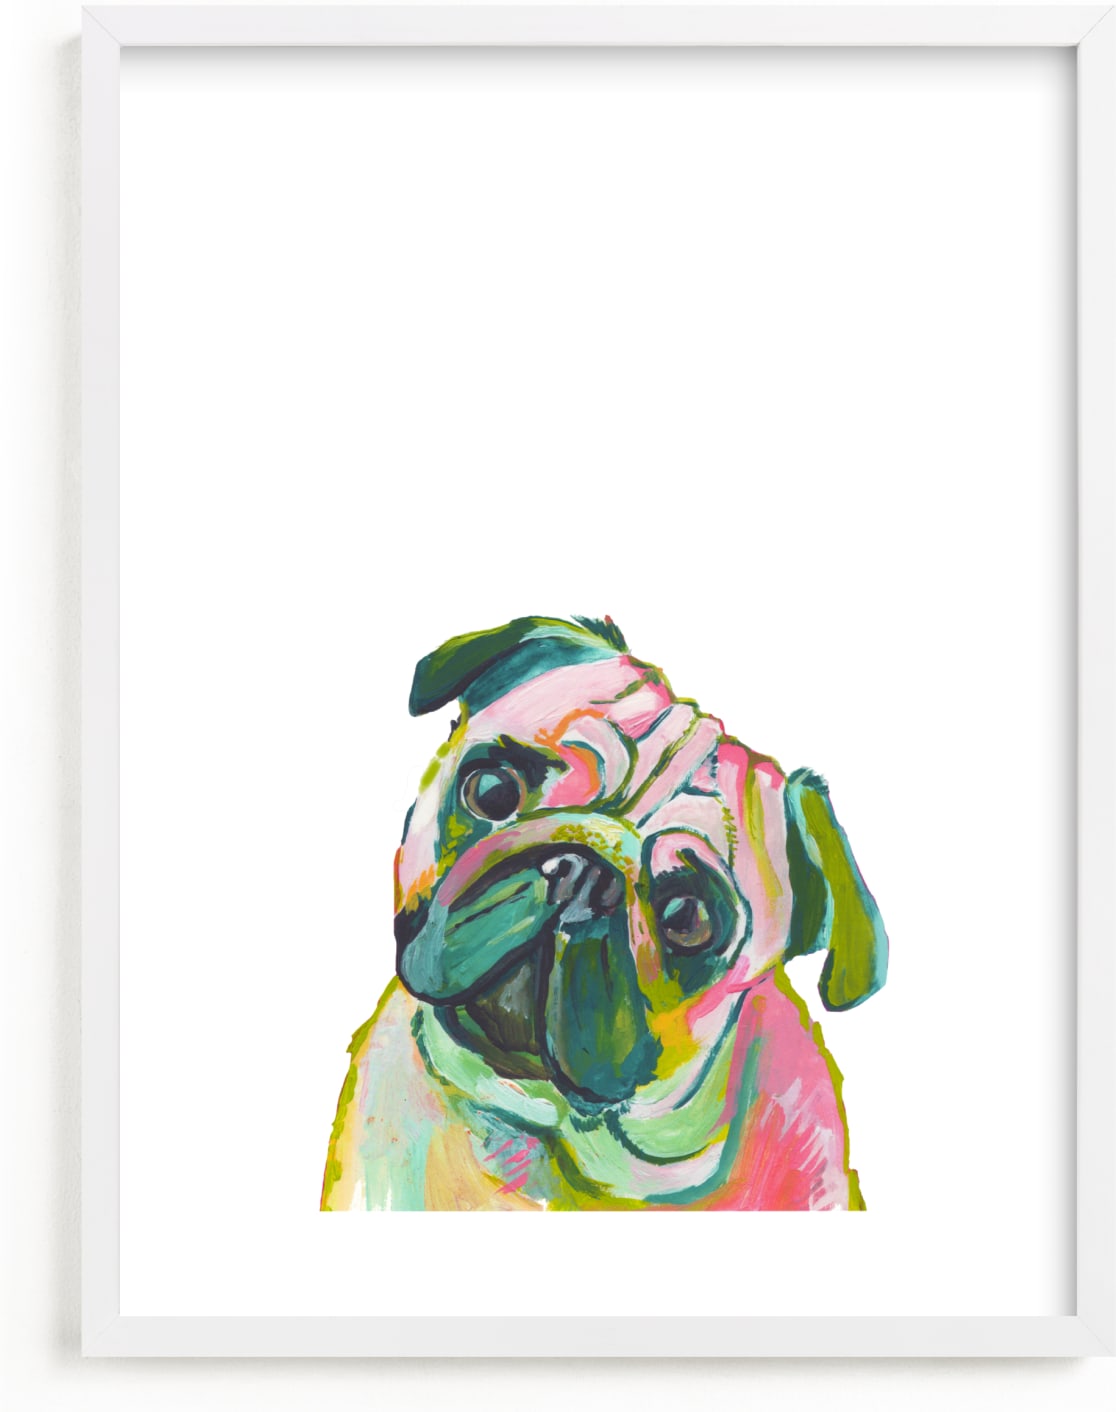 This is a colorful kids wall art by Makewells called Mr. Pug.